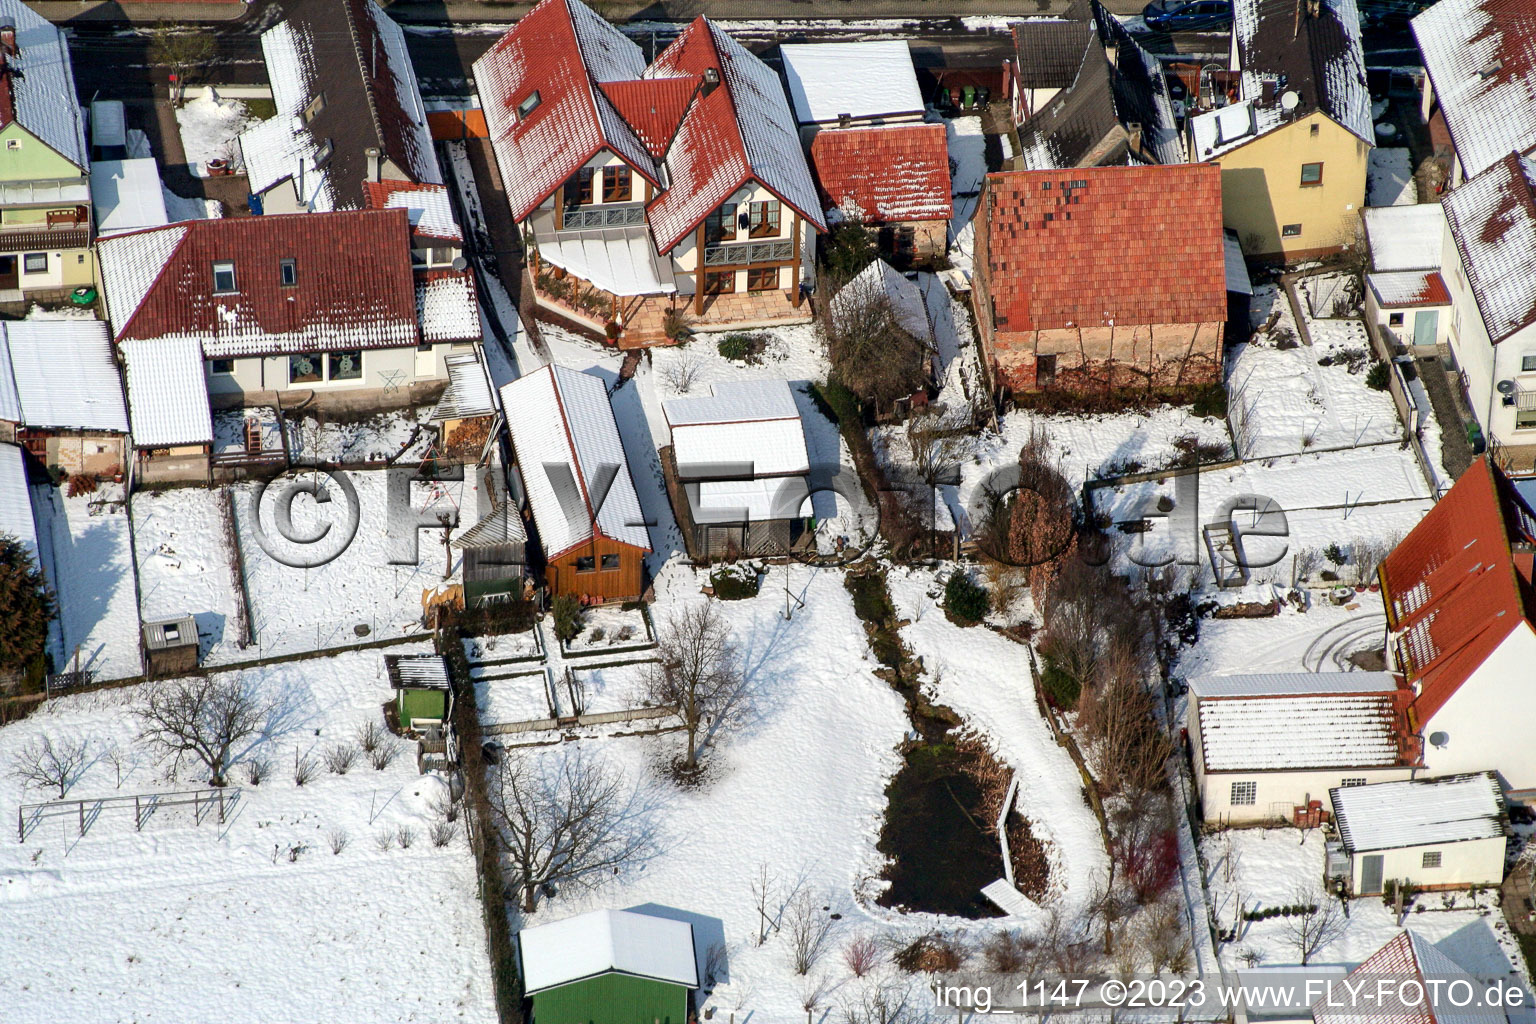 Aerial photograpy of In the snow in Freckenfeld in the state Rhineland-Palatinate, Germany